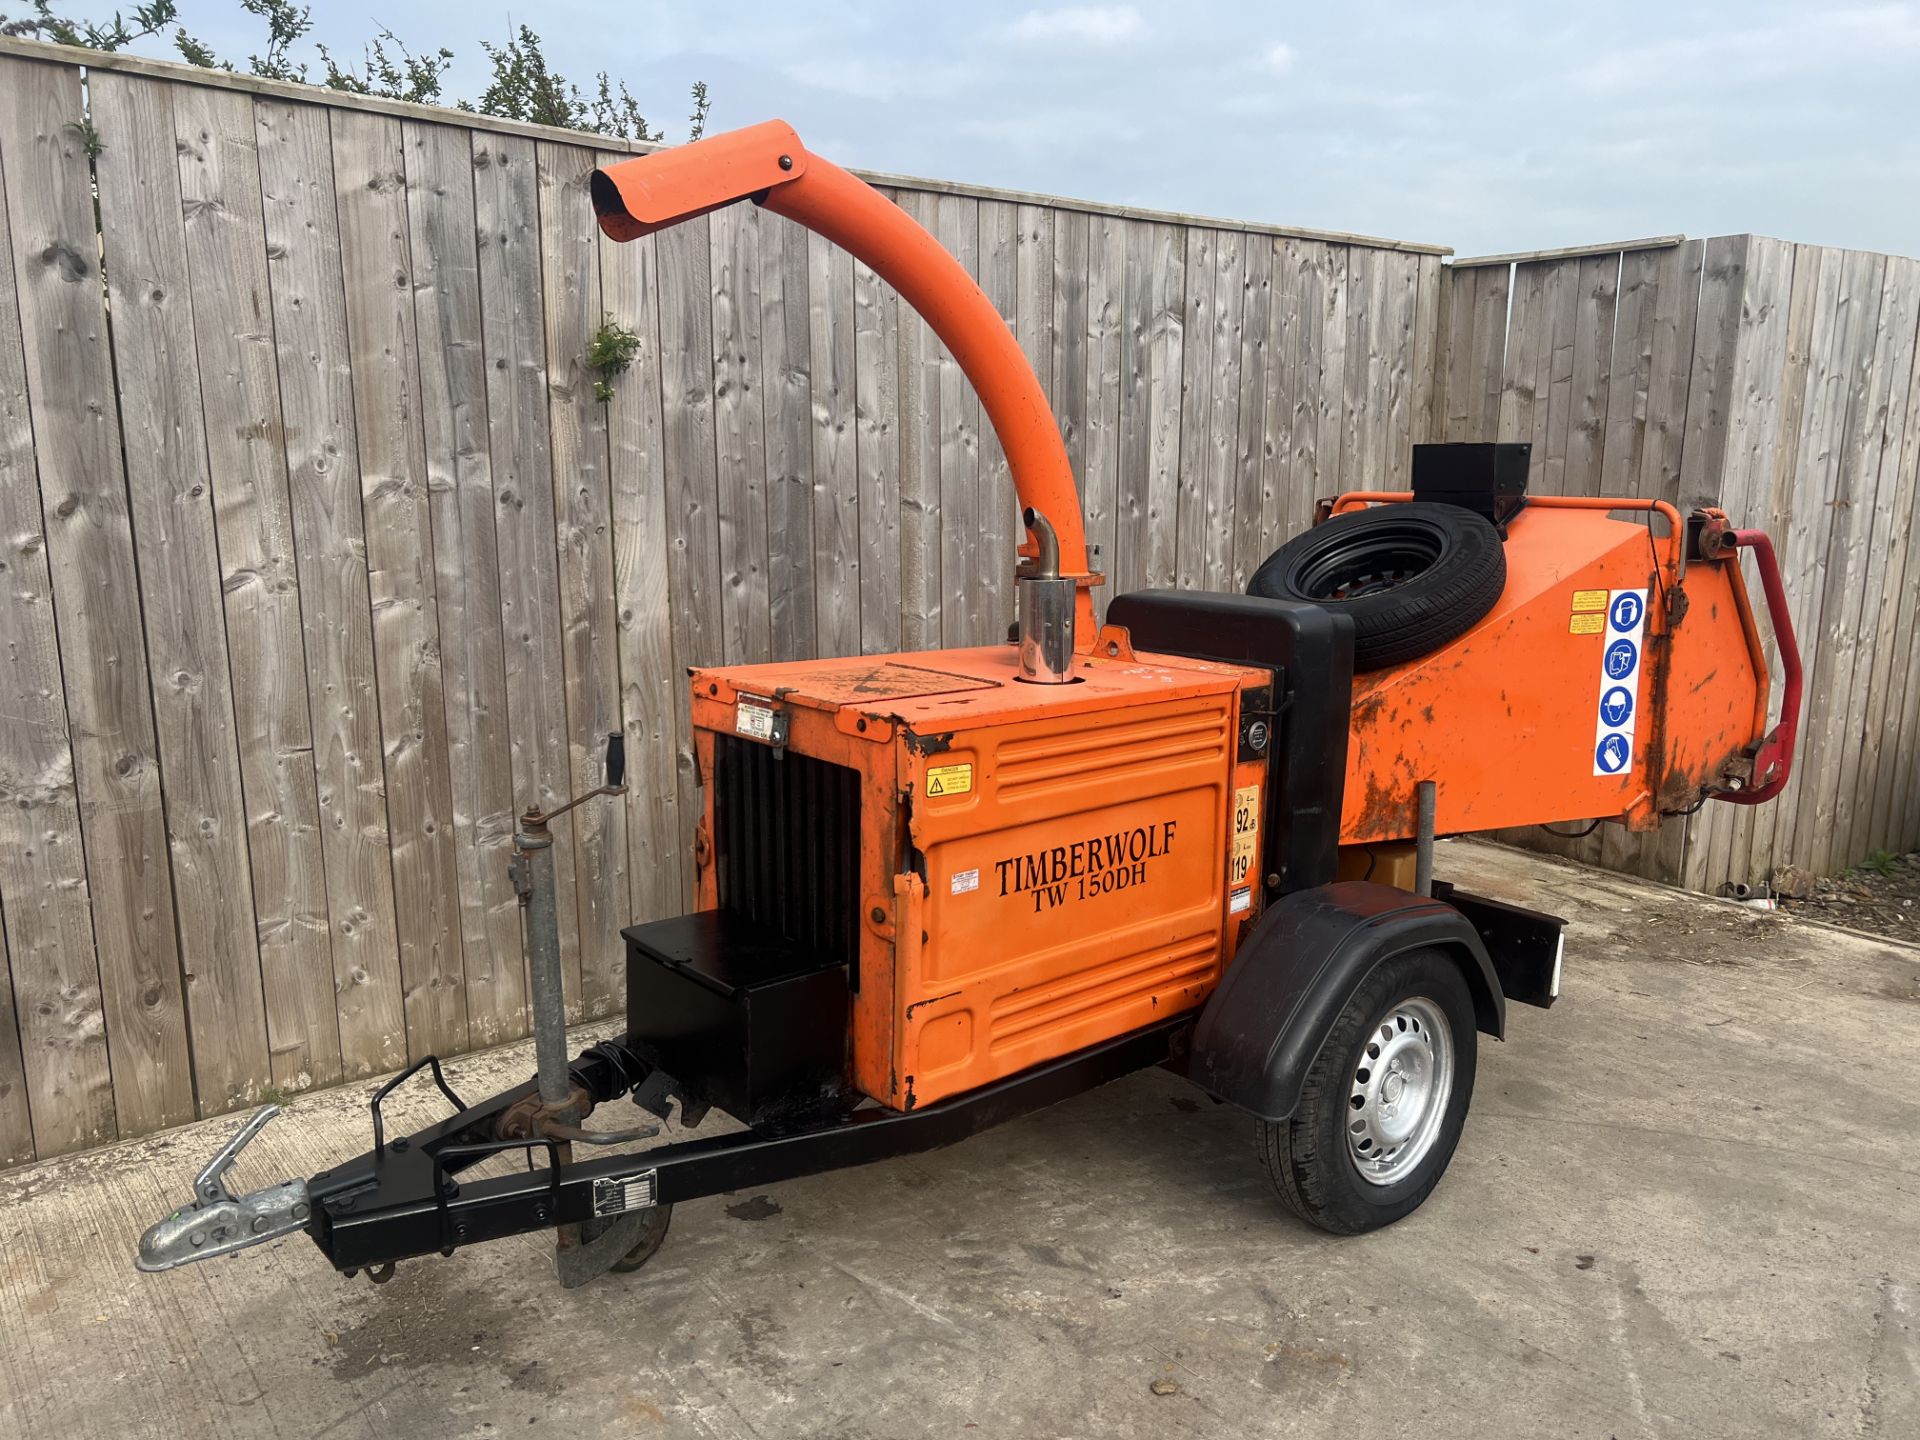 TIMBERWOLF TW150H TOWABLE DIESEL WOOD CHIPPER *LOCATION NORTH YORKSHIRE* - Image 4 of 6